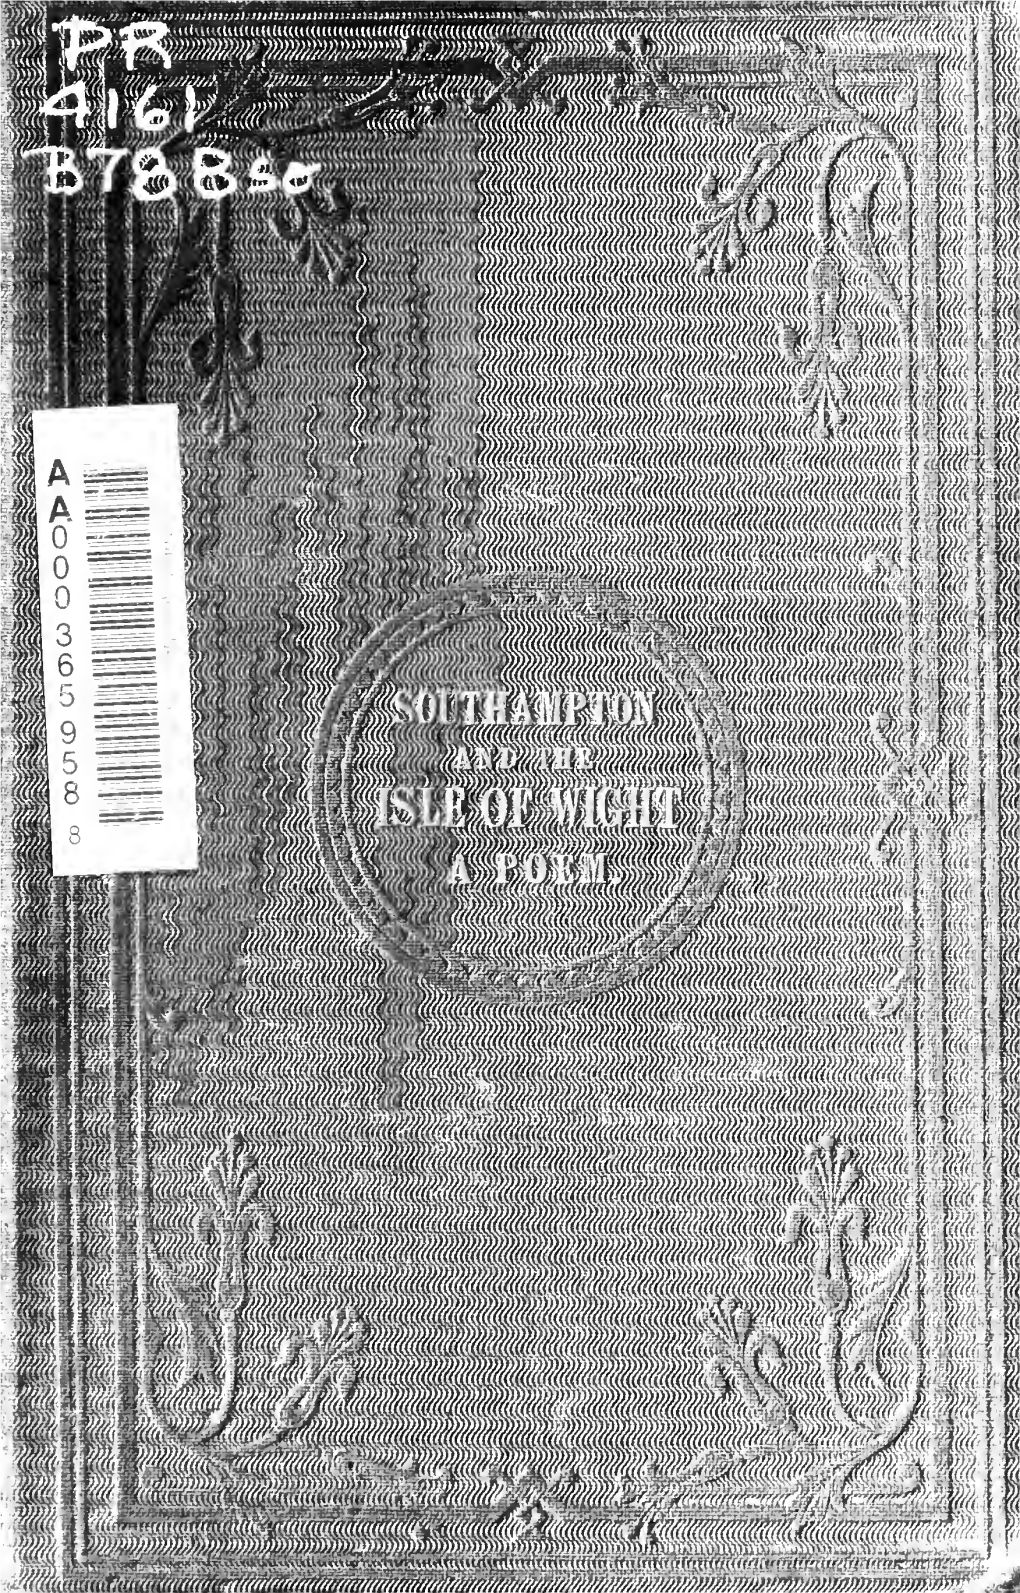 Southampton and the Isle of Wight; a Poem in Four Books